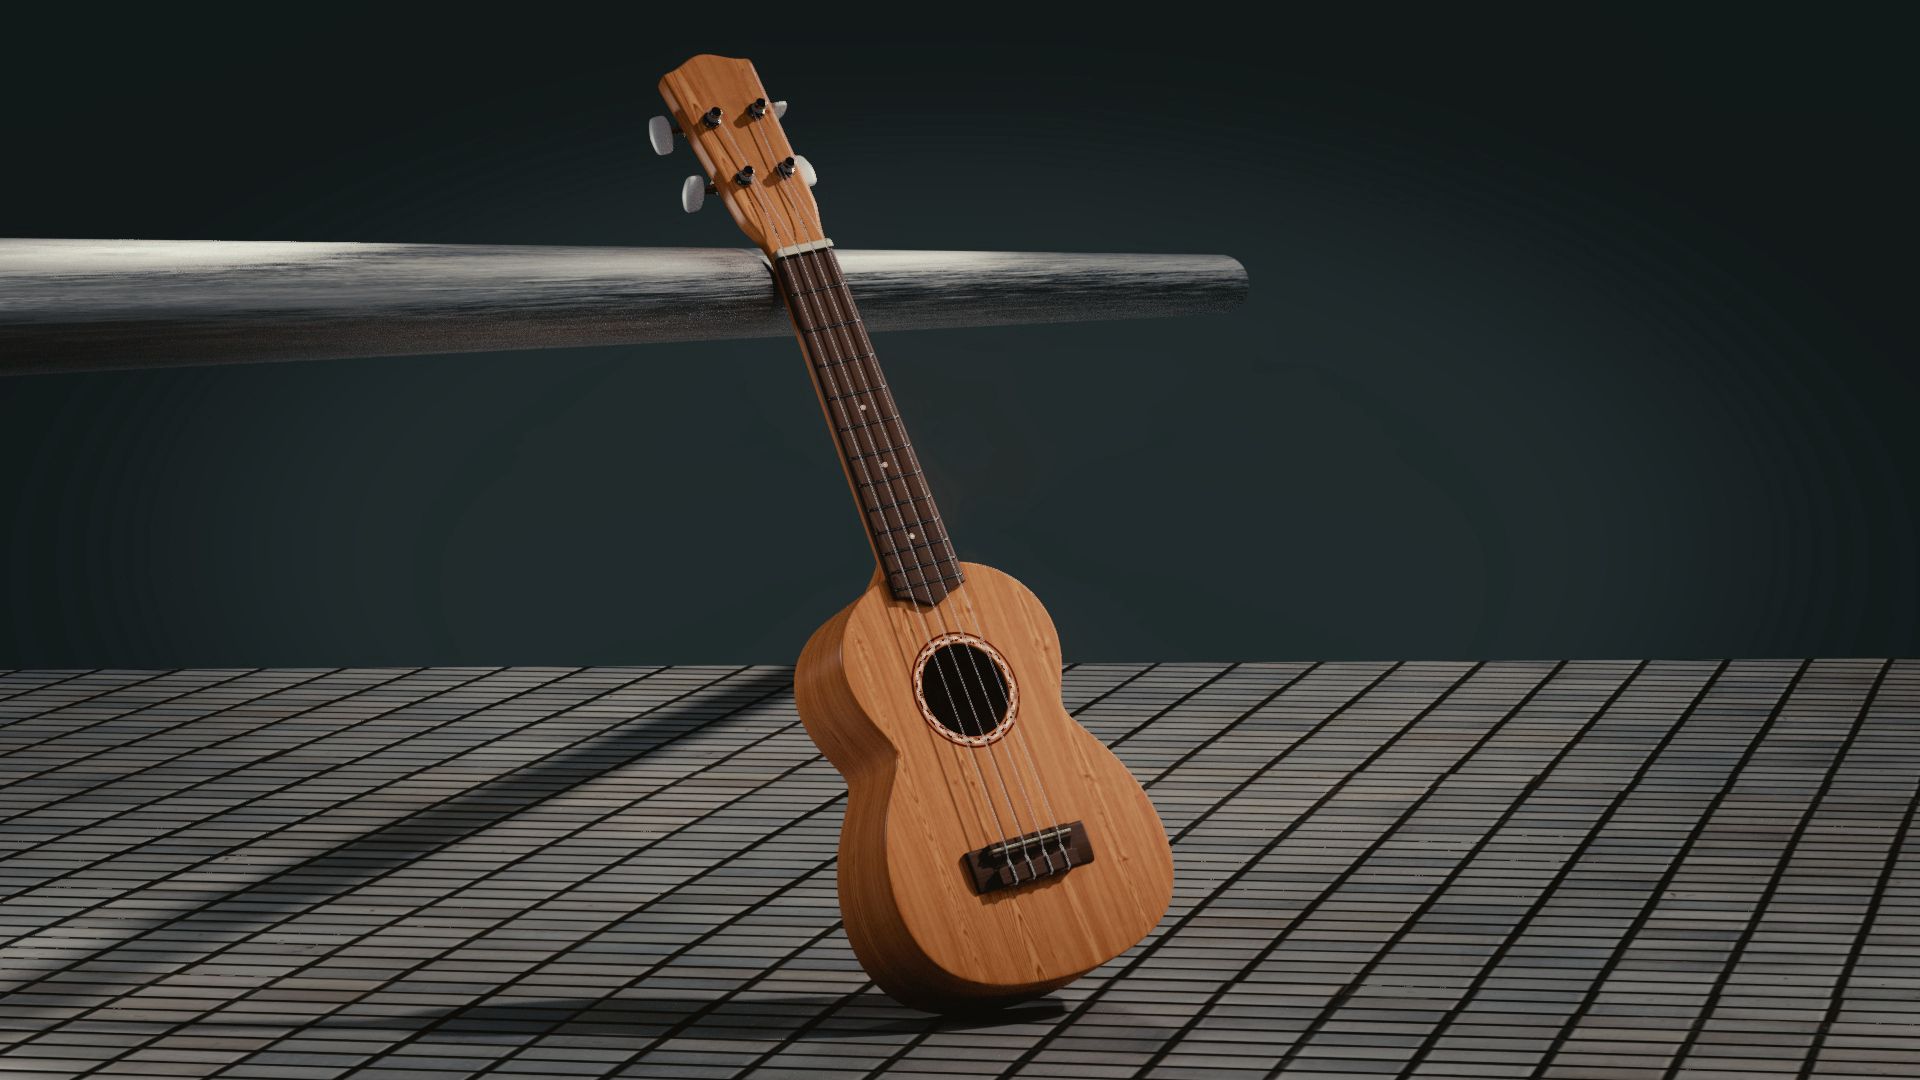 105544 download wallpaper 3d, guitar, musical instrument, space screensavers and pictures for free